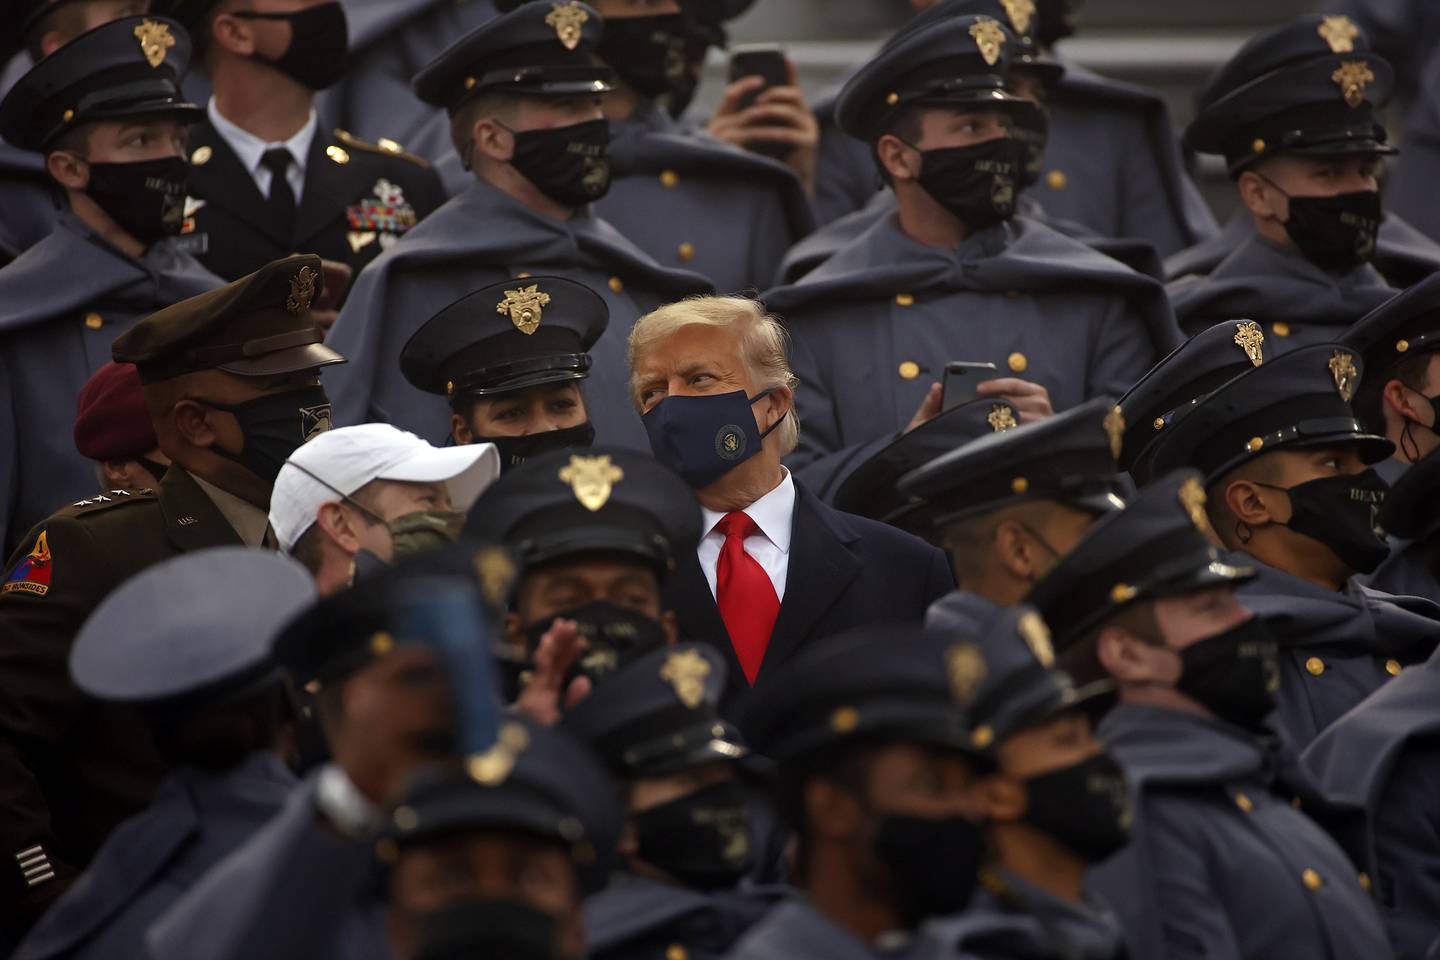 President Donald Trump watches an NCAA college football game with Army cadets during the Army-Navy NCAA college football game on Saturday, Dec. 12, 2020, in West Point, N.Y.